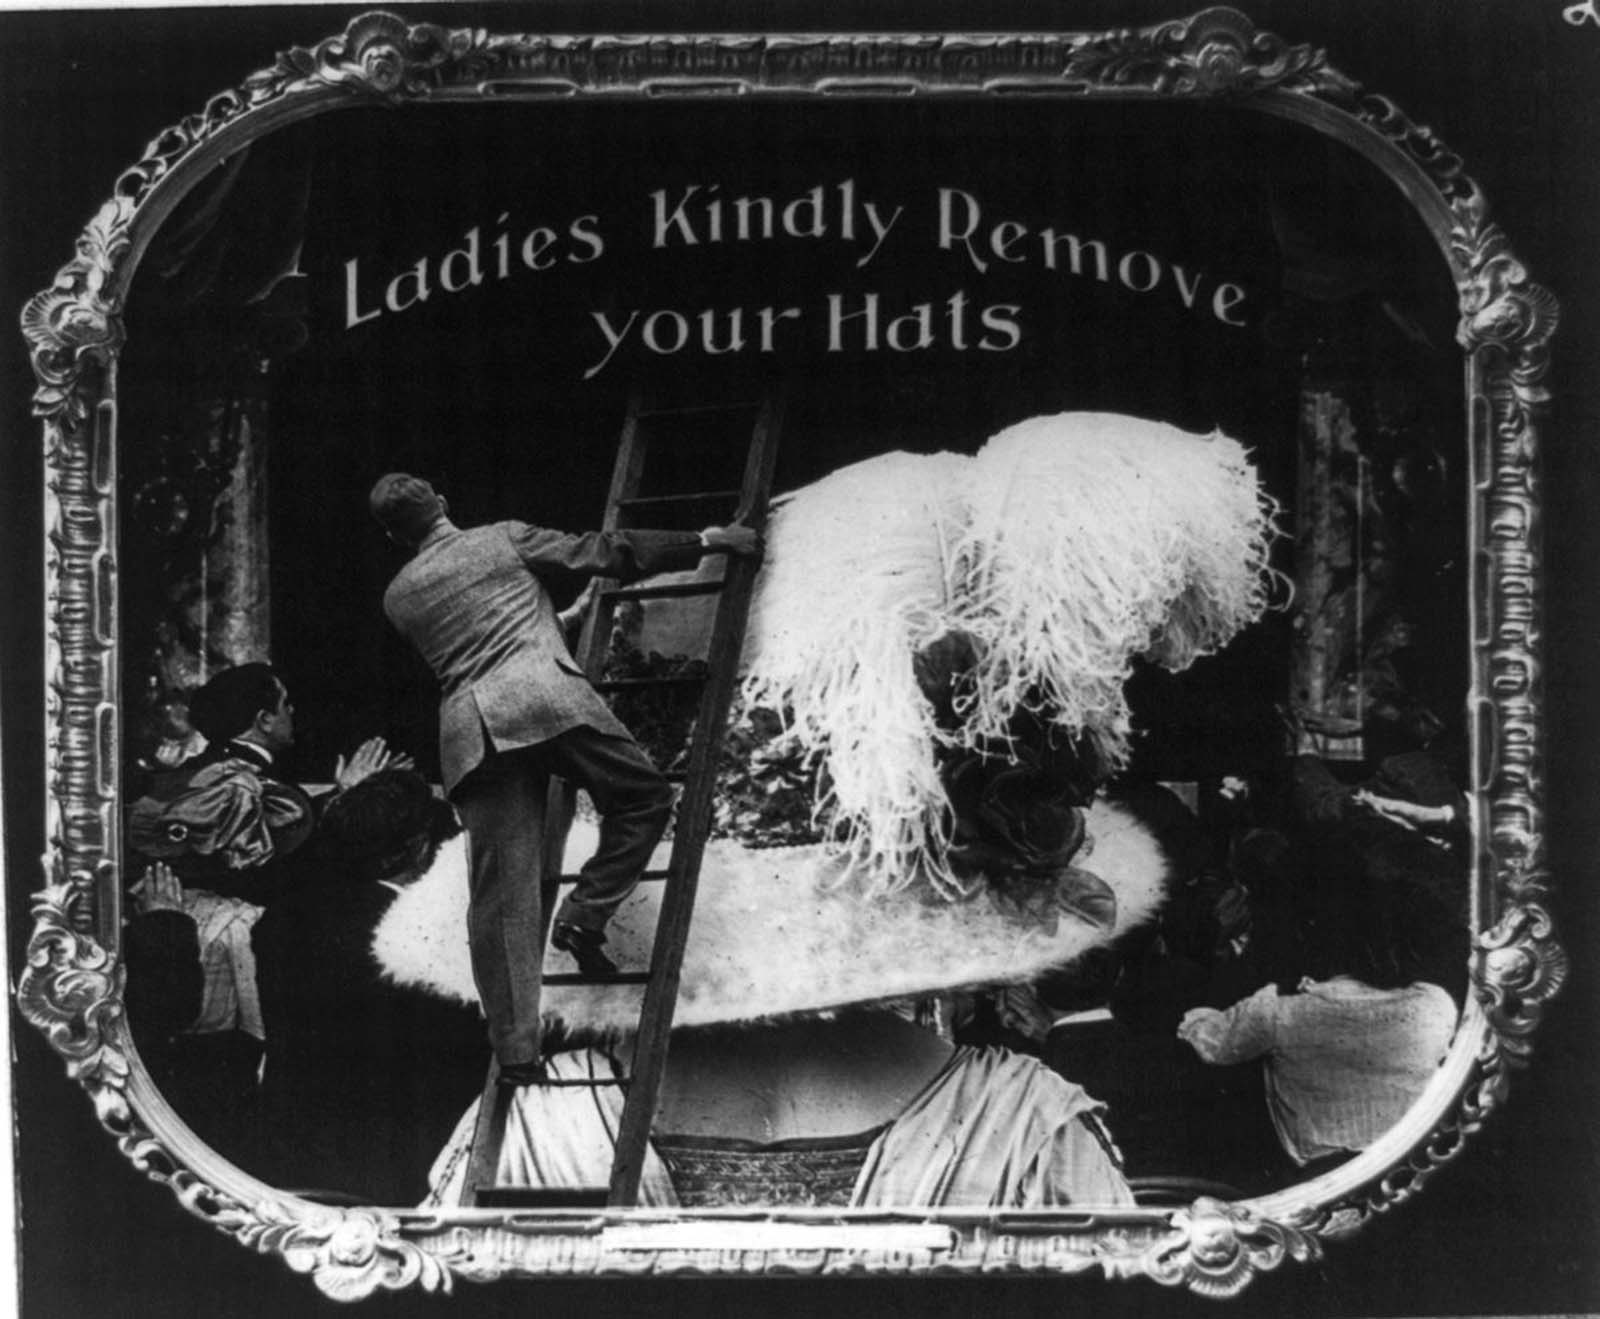 Women were again reminded to remove their hats during the film and this particular message was illustrated with a man using a ladder to see over it.